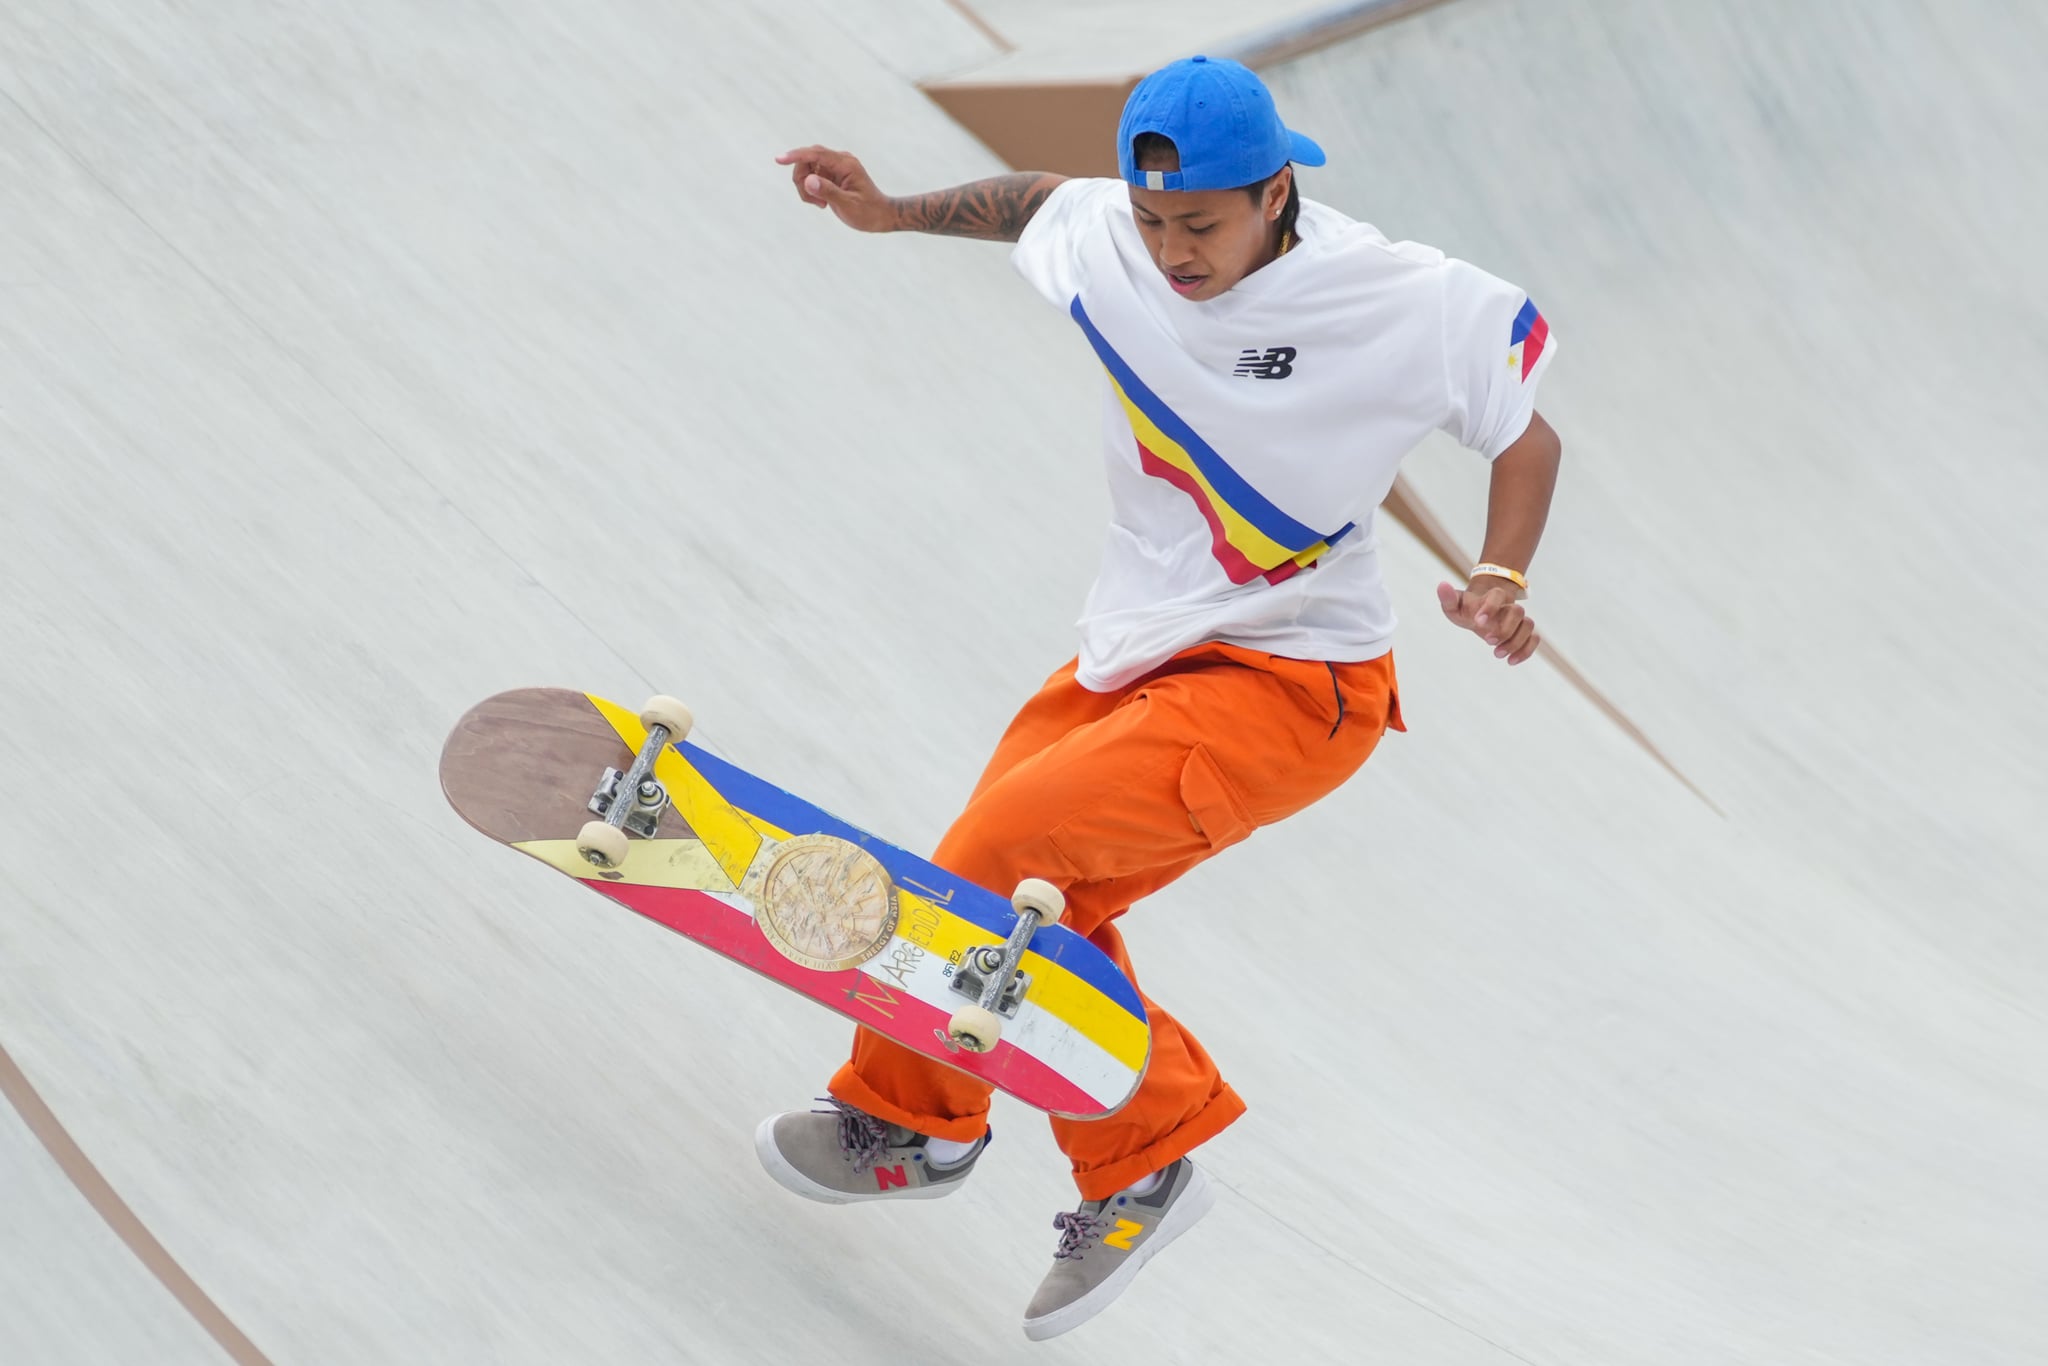 The Skateboarders at Tokyo Olympics Have the Best Style Fashion